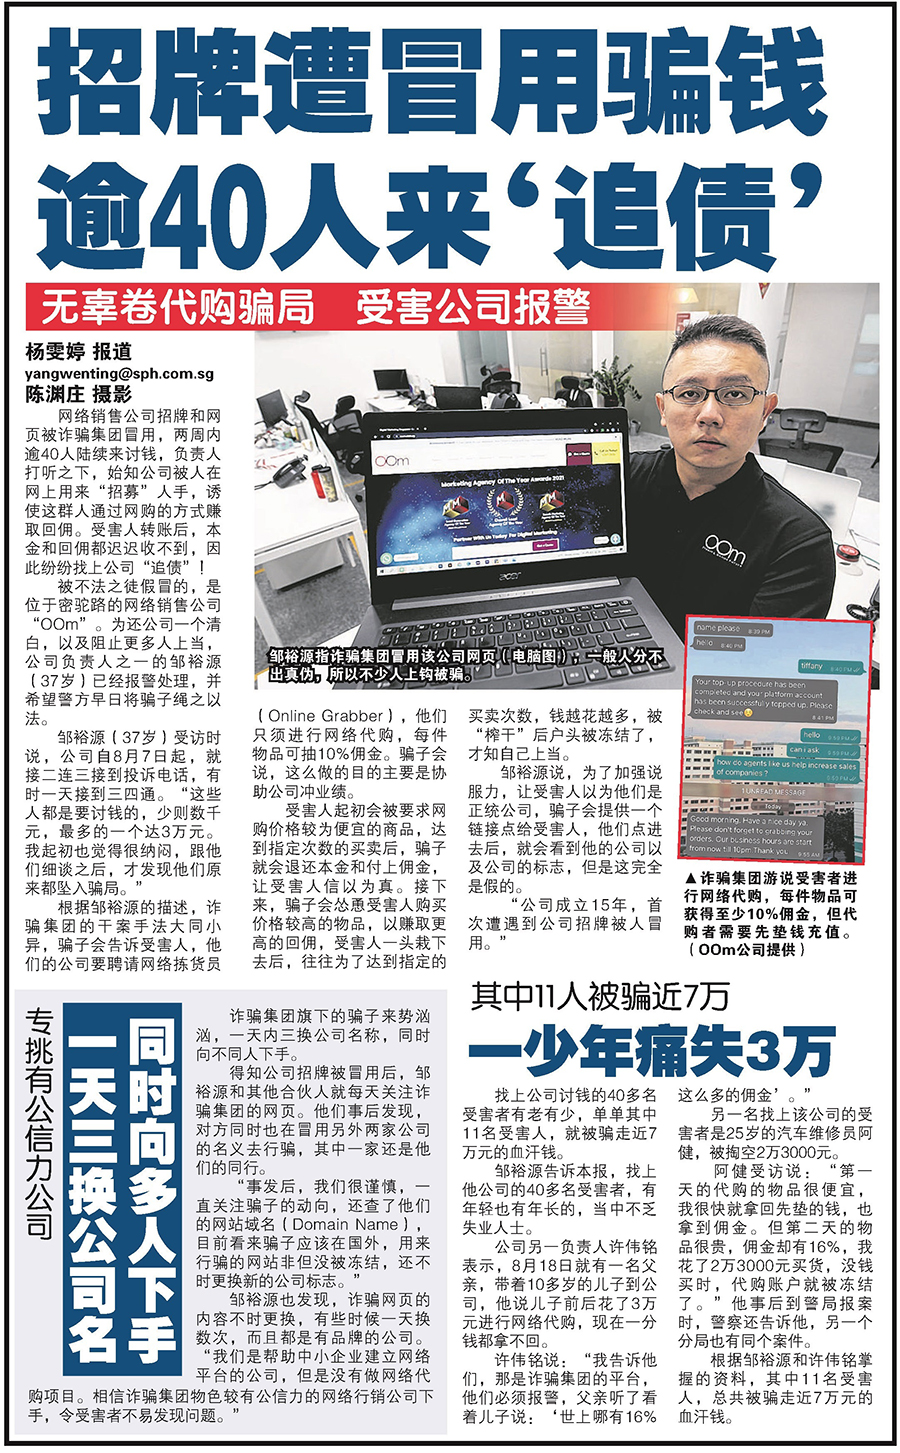 Lianhe Zaobao’s article about the scam incident